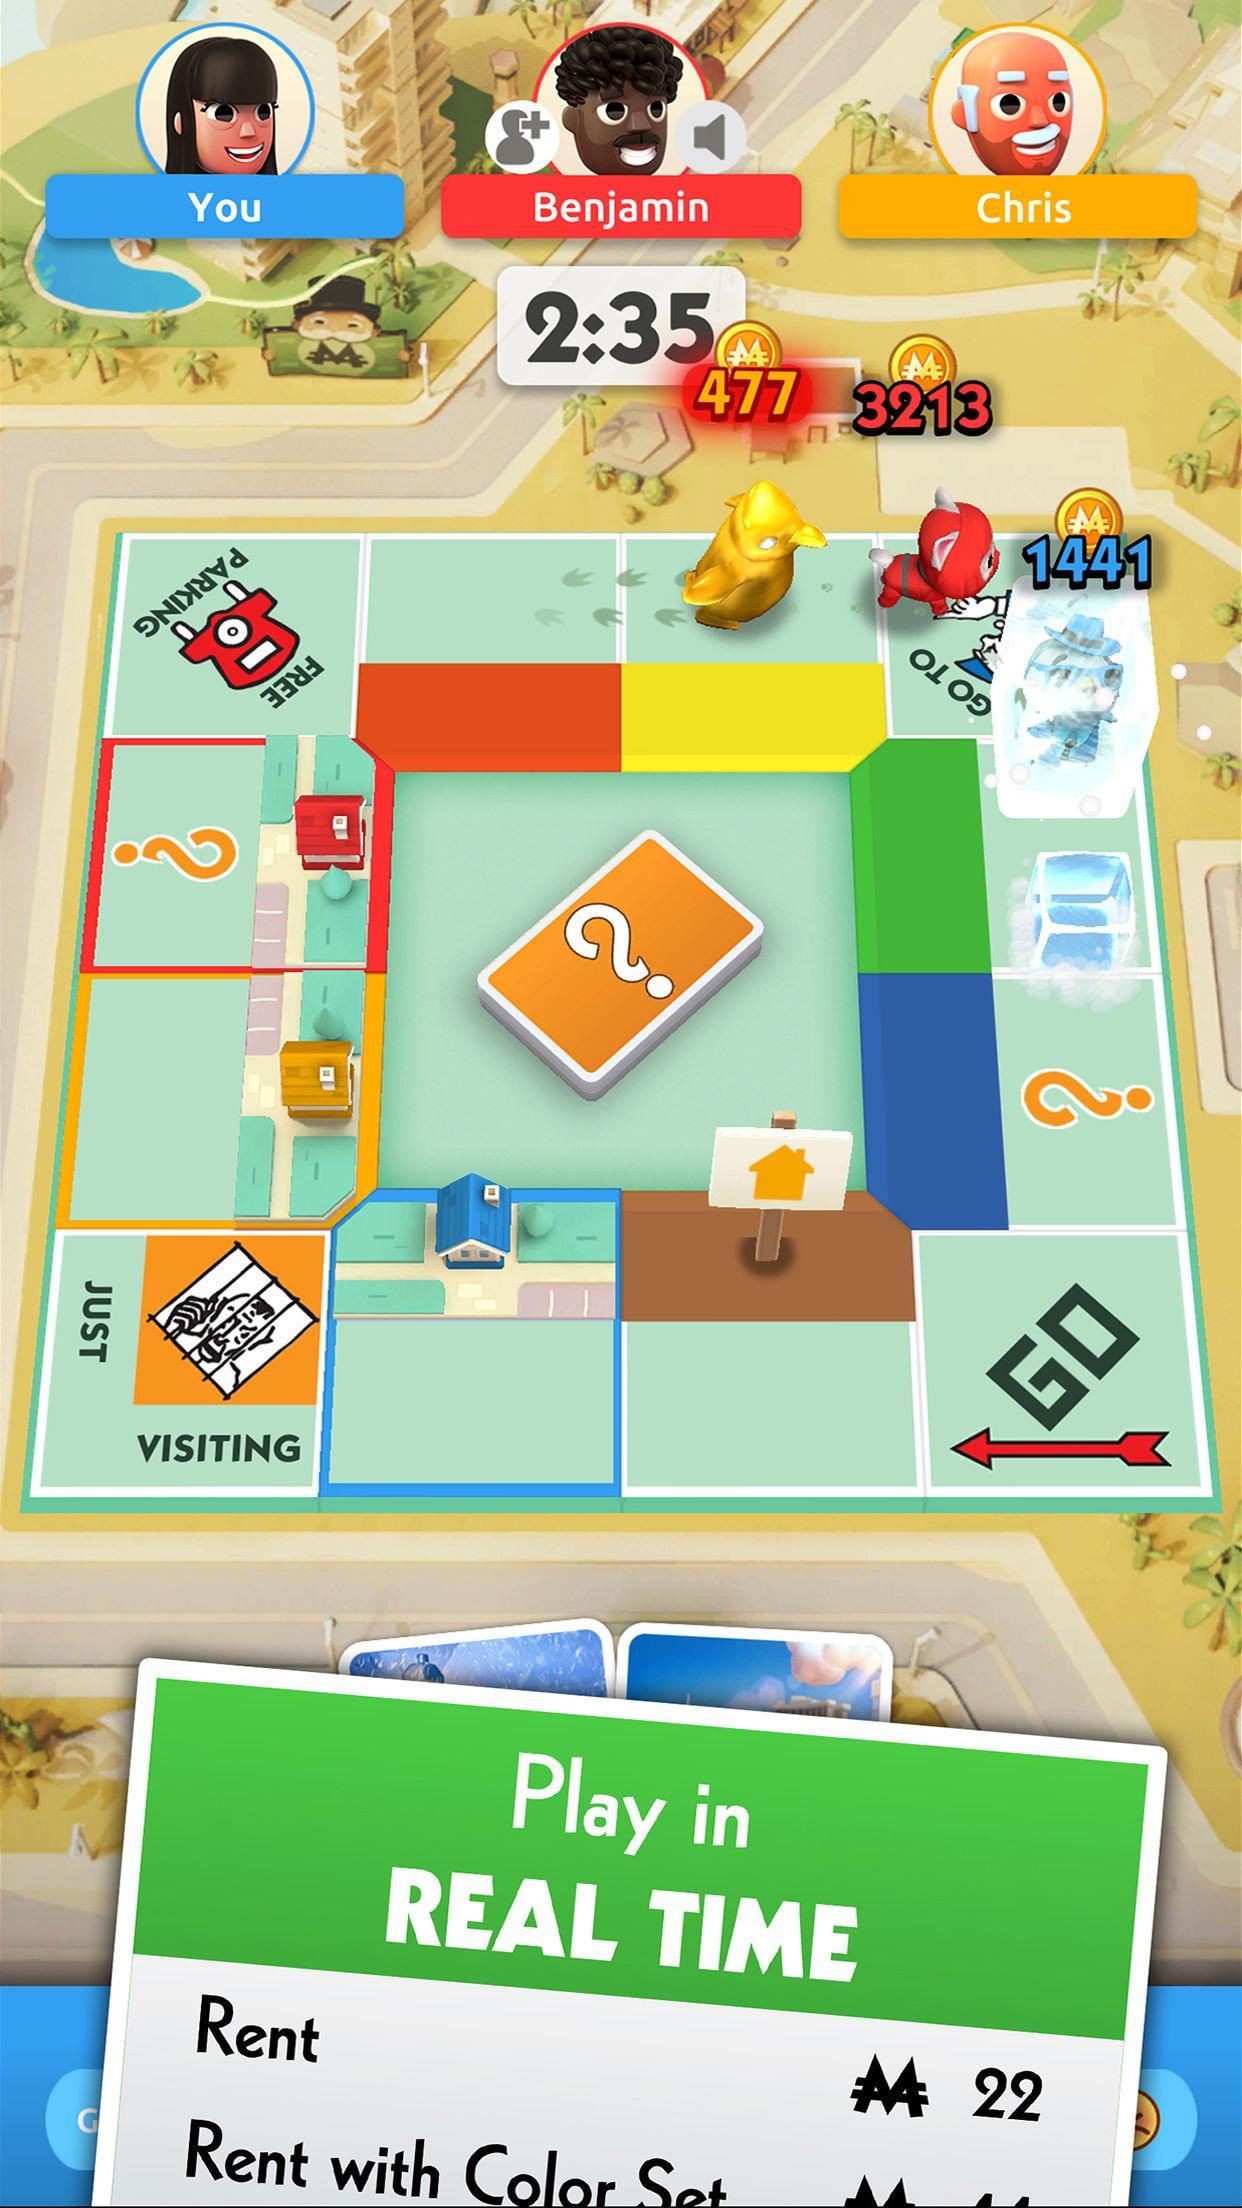 Monopoly GO! APK for Android Download